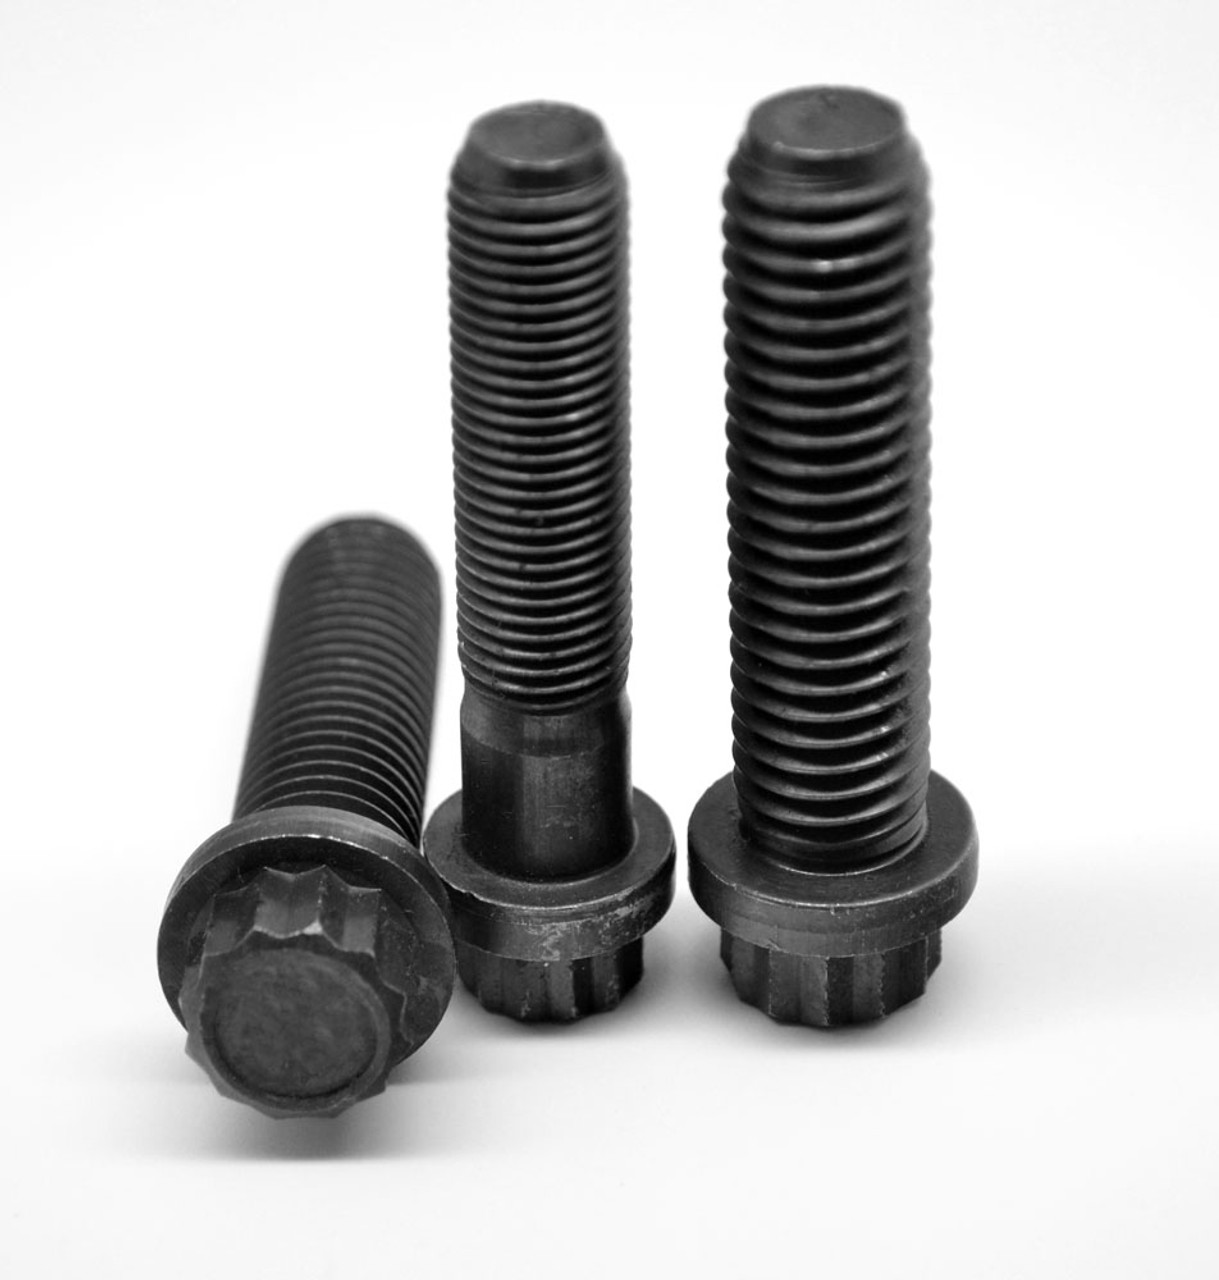 5/16-18 x 1 1/2 Coarse Thread 12-Point Flange Screw Alloy Steel Thermal Black Oxide